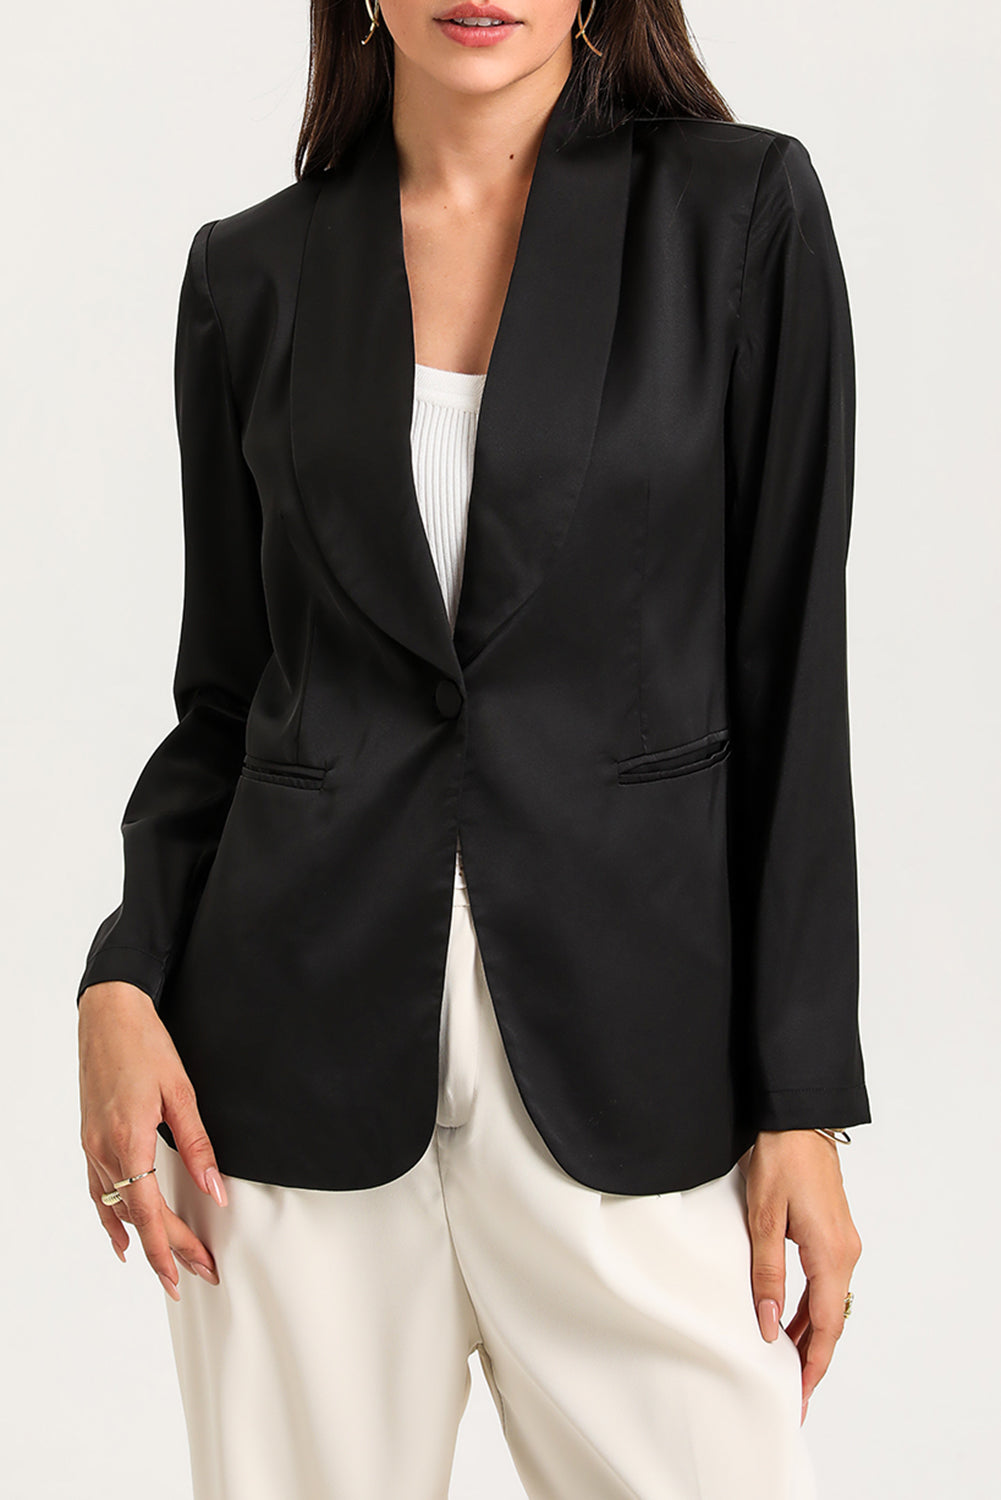 Black Collared Neck Single Breasted Blazer with Pockets